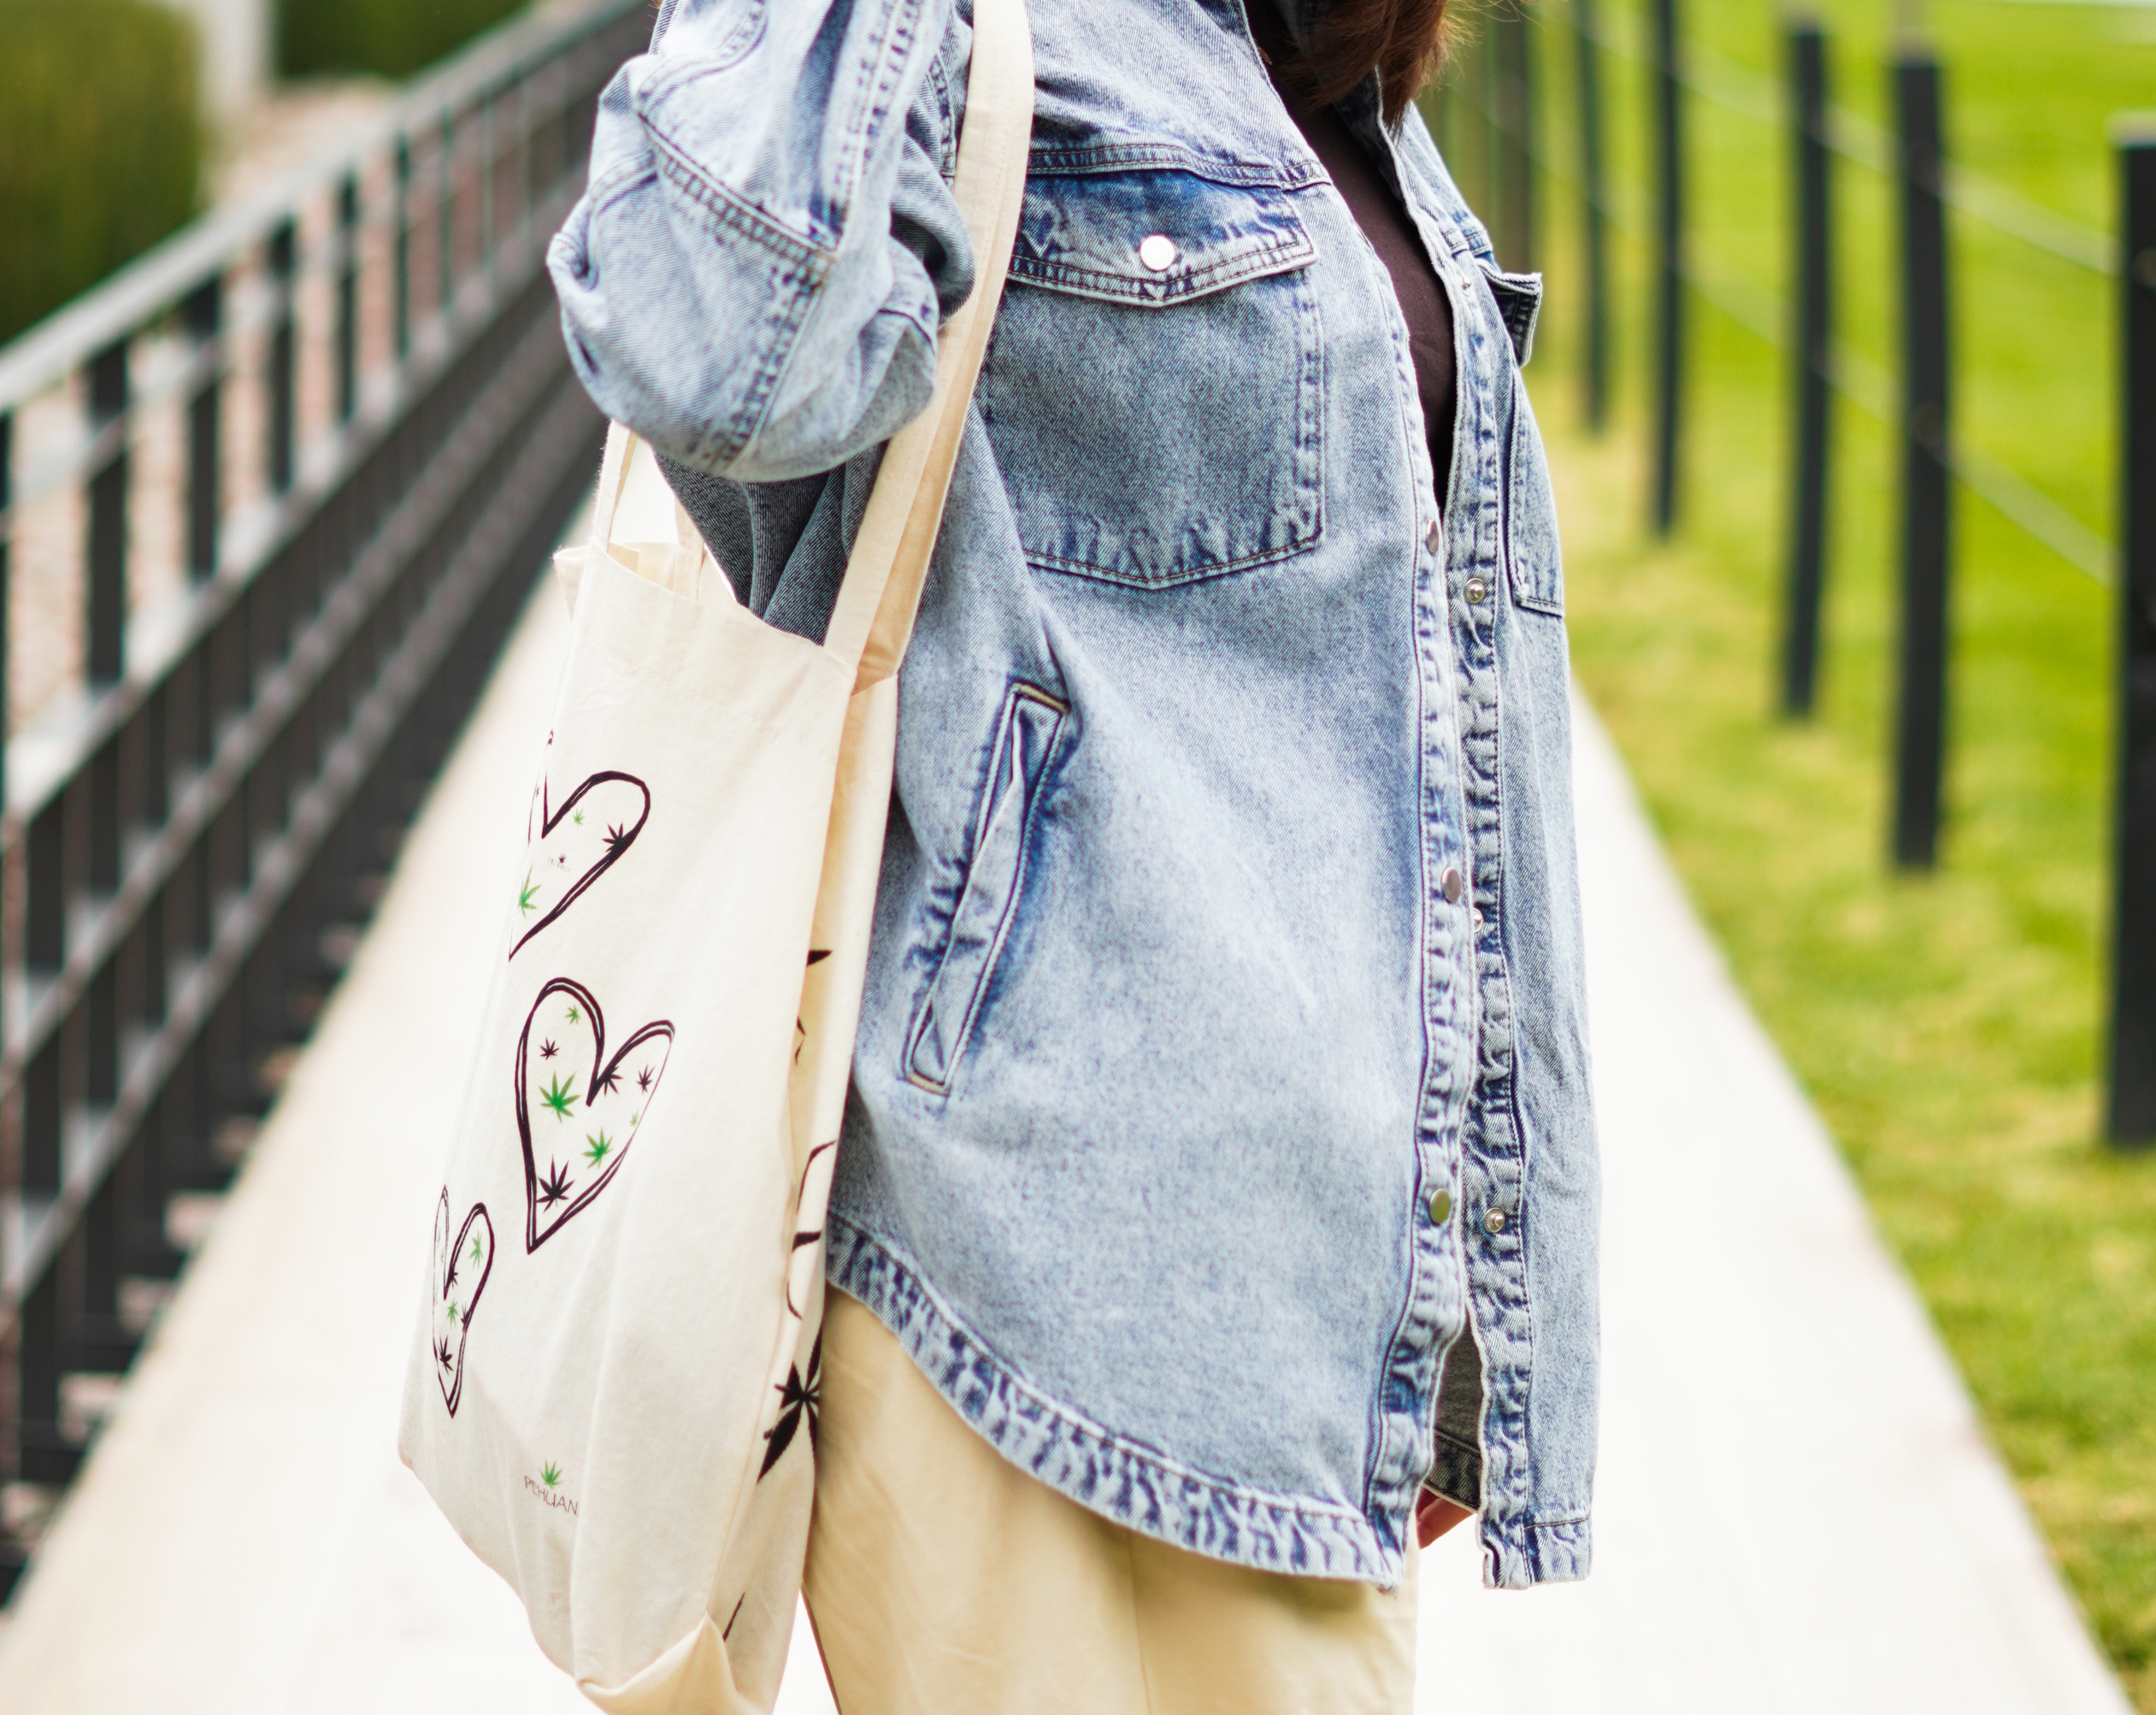 DIY Denim Tote Bag Made with Recycled Jeans - Free Guide